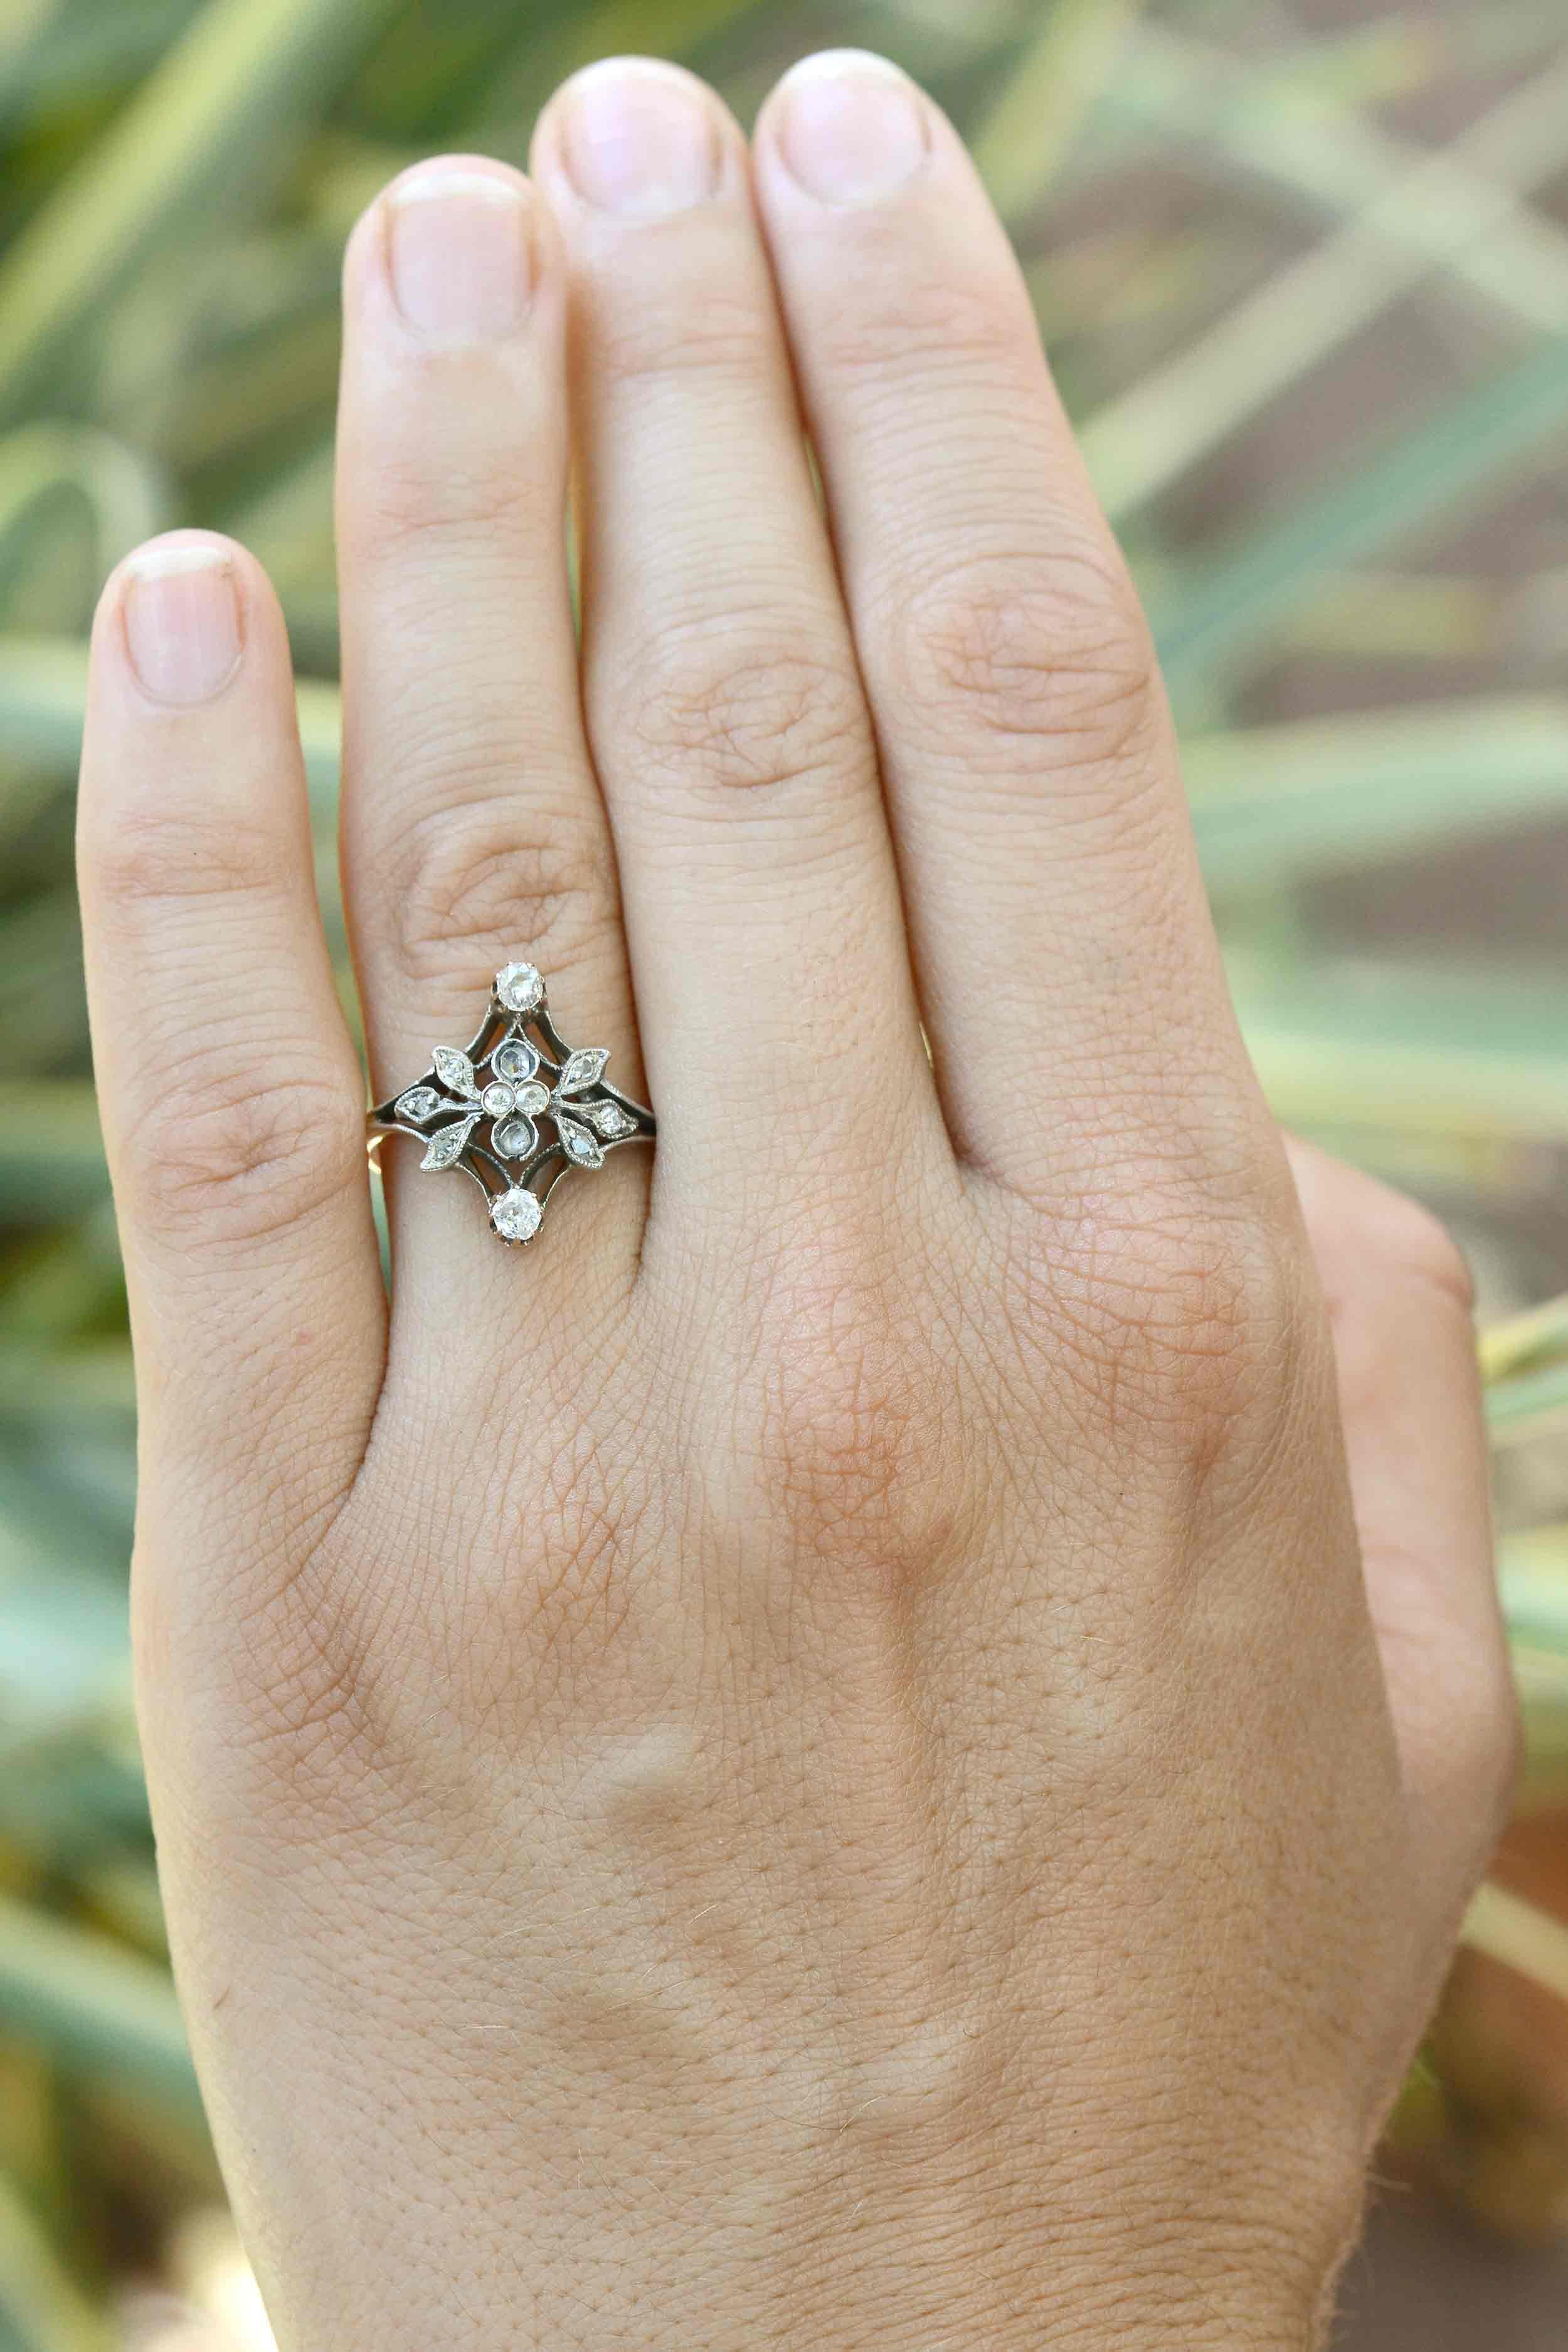 The Oakland Art Nouveau engagement ring. This is a dainty diamond vine design, original antique treasure that can double as a wedding band. We fawn over the floral, lacy milgrain, old mine cut and rose cut diamonds of this vintage estate ring